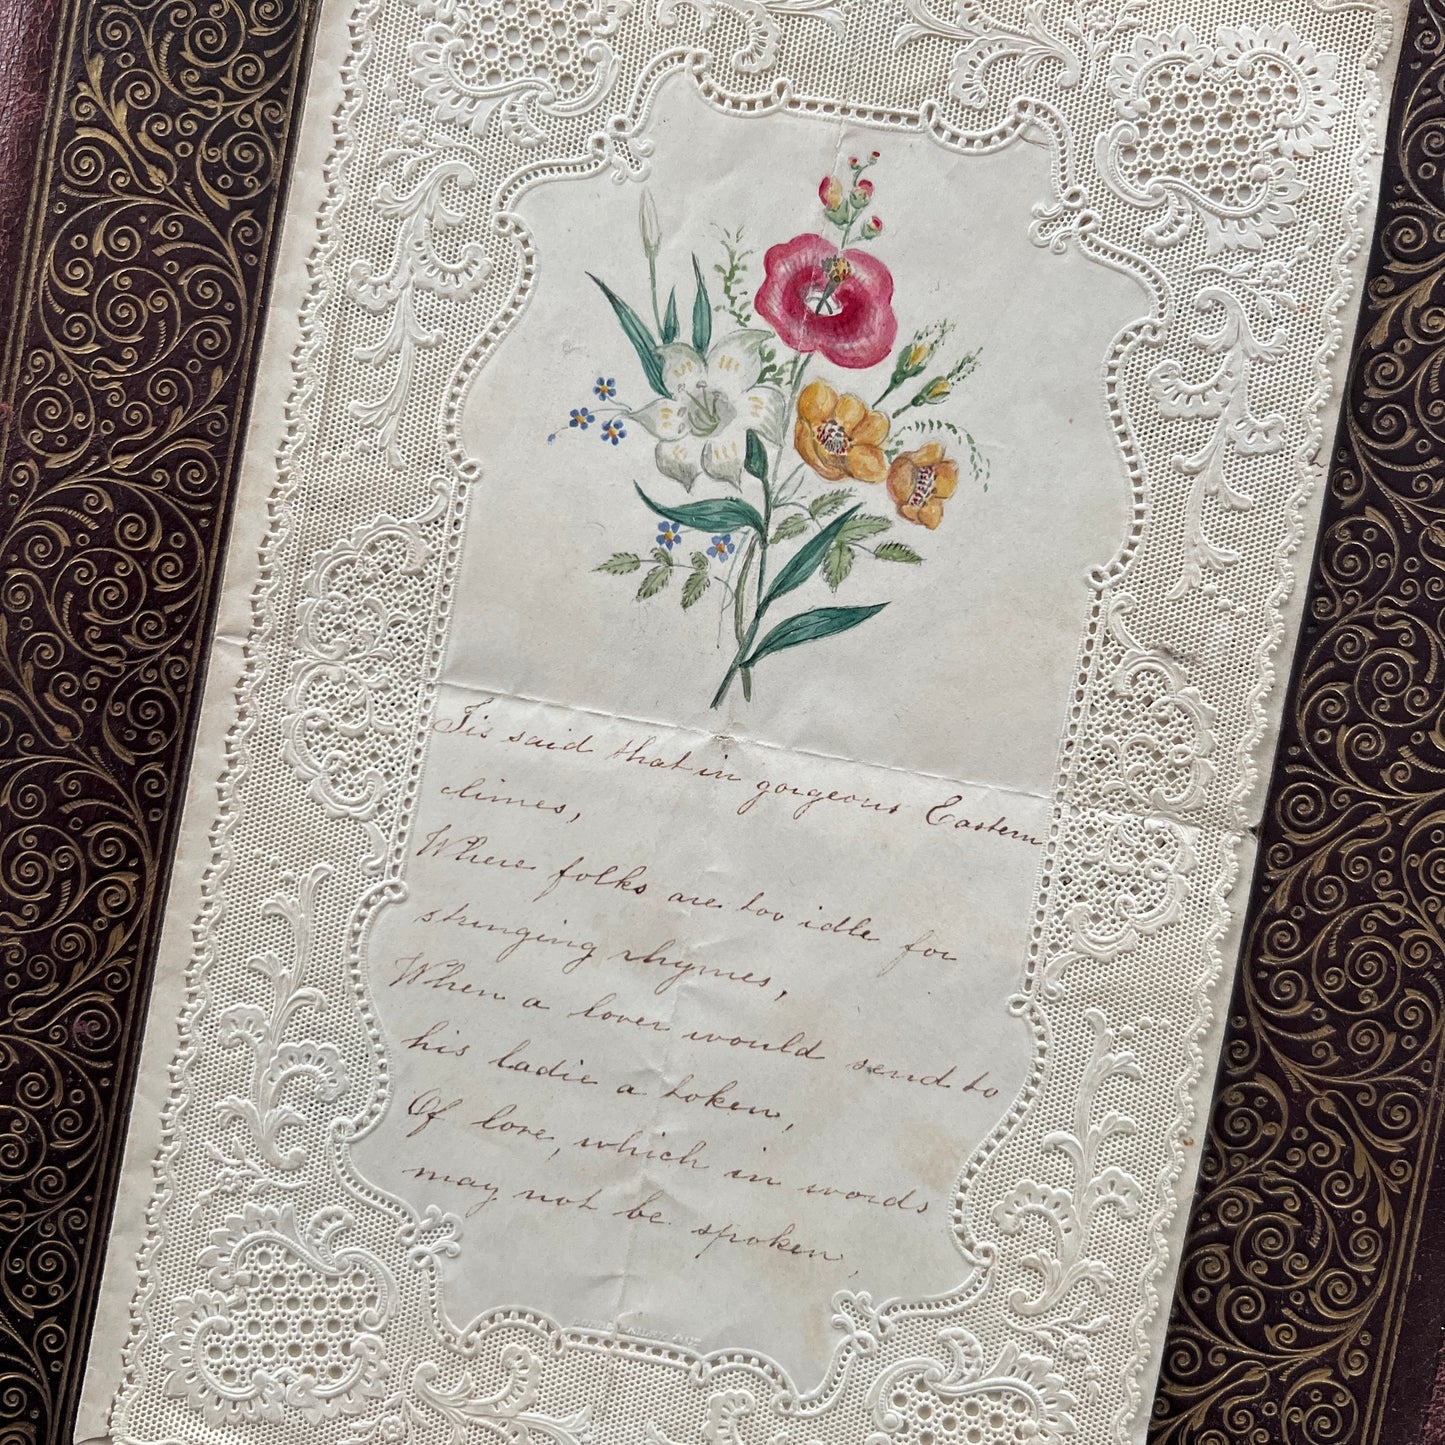 c. 1850s Embossed Lace Valentine Card with Hand-painted Flowers and Hand-written Poem